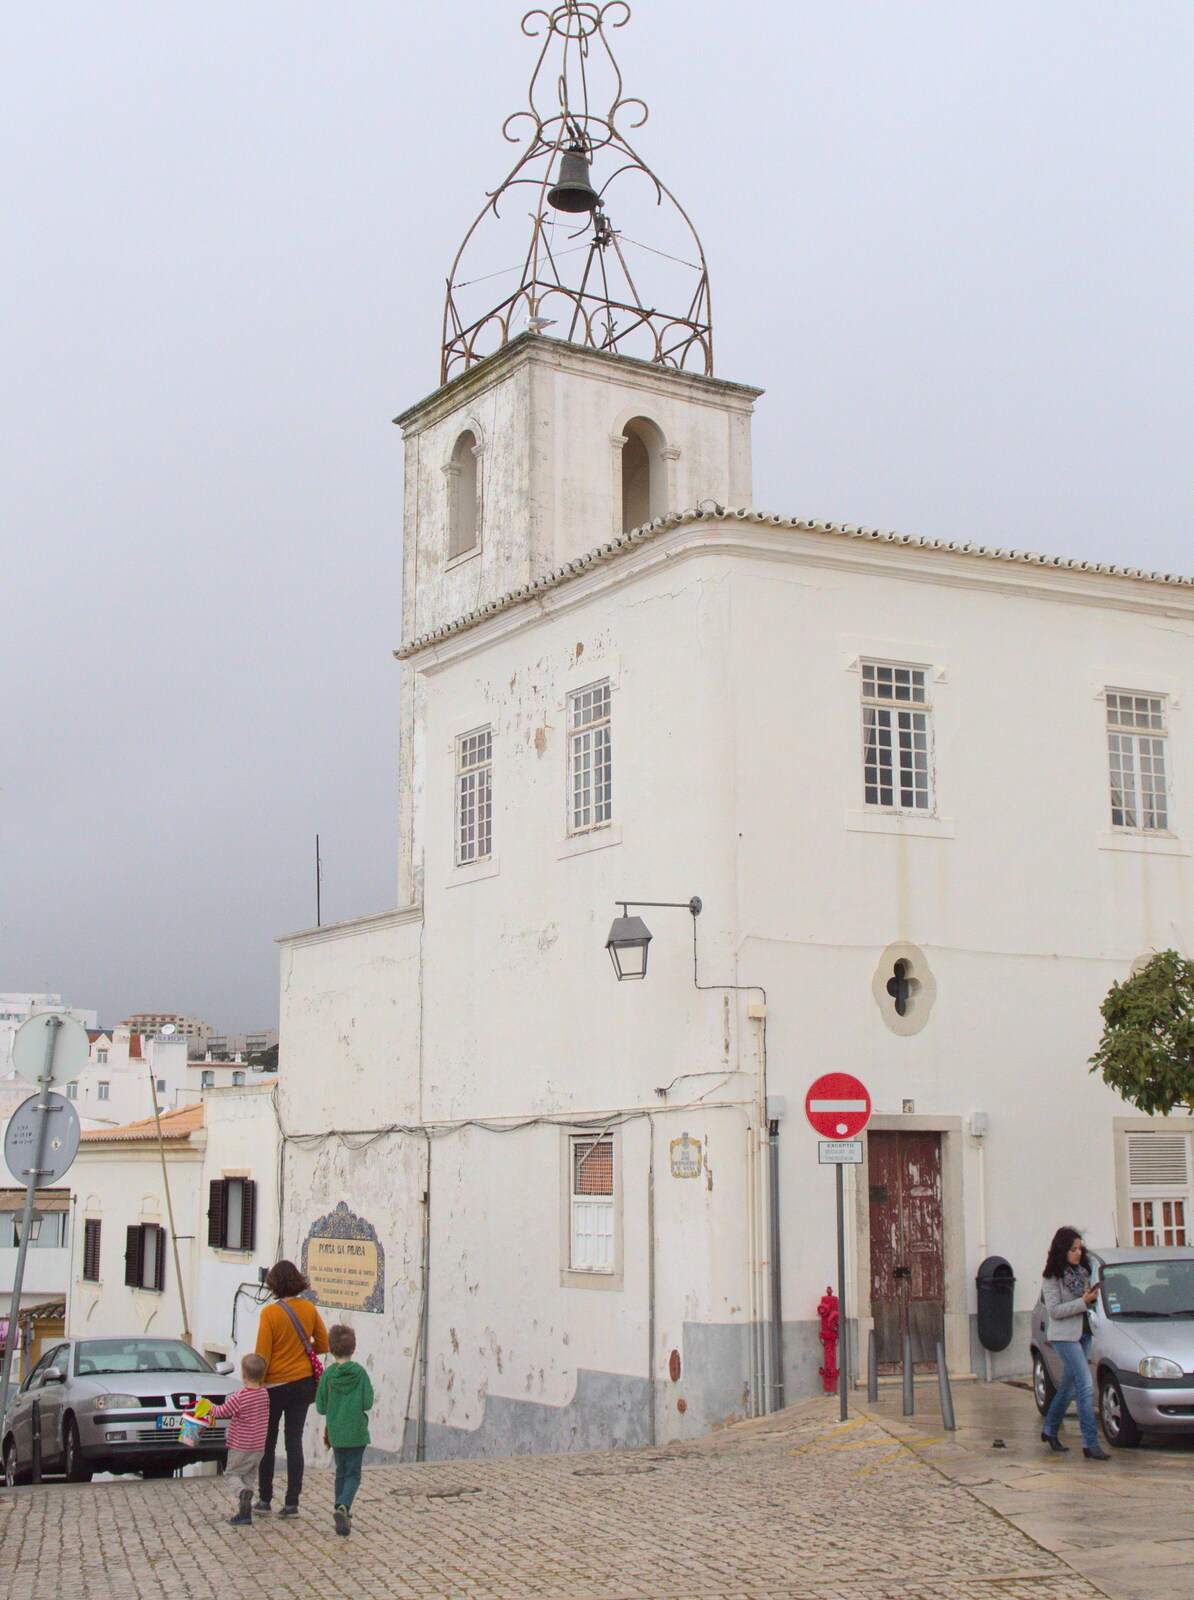 We wander around near a church from A Trip to Albufeira: The Hotel Paraiso, Portugal - 3rd April 2016